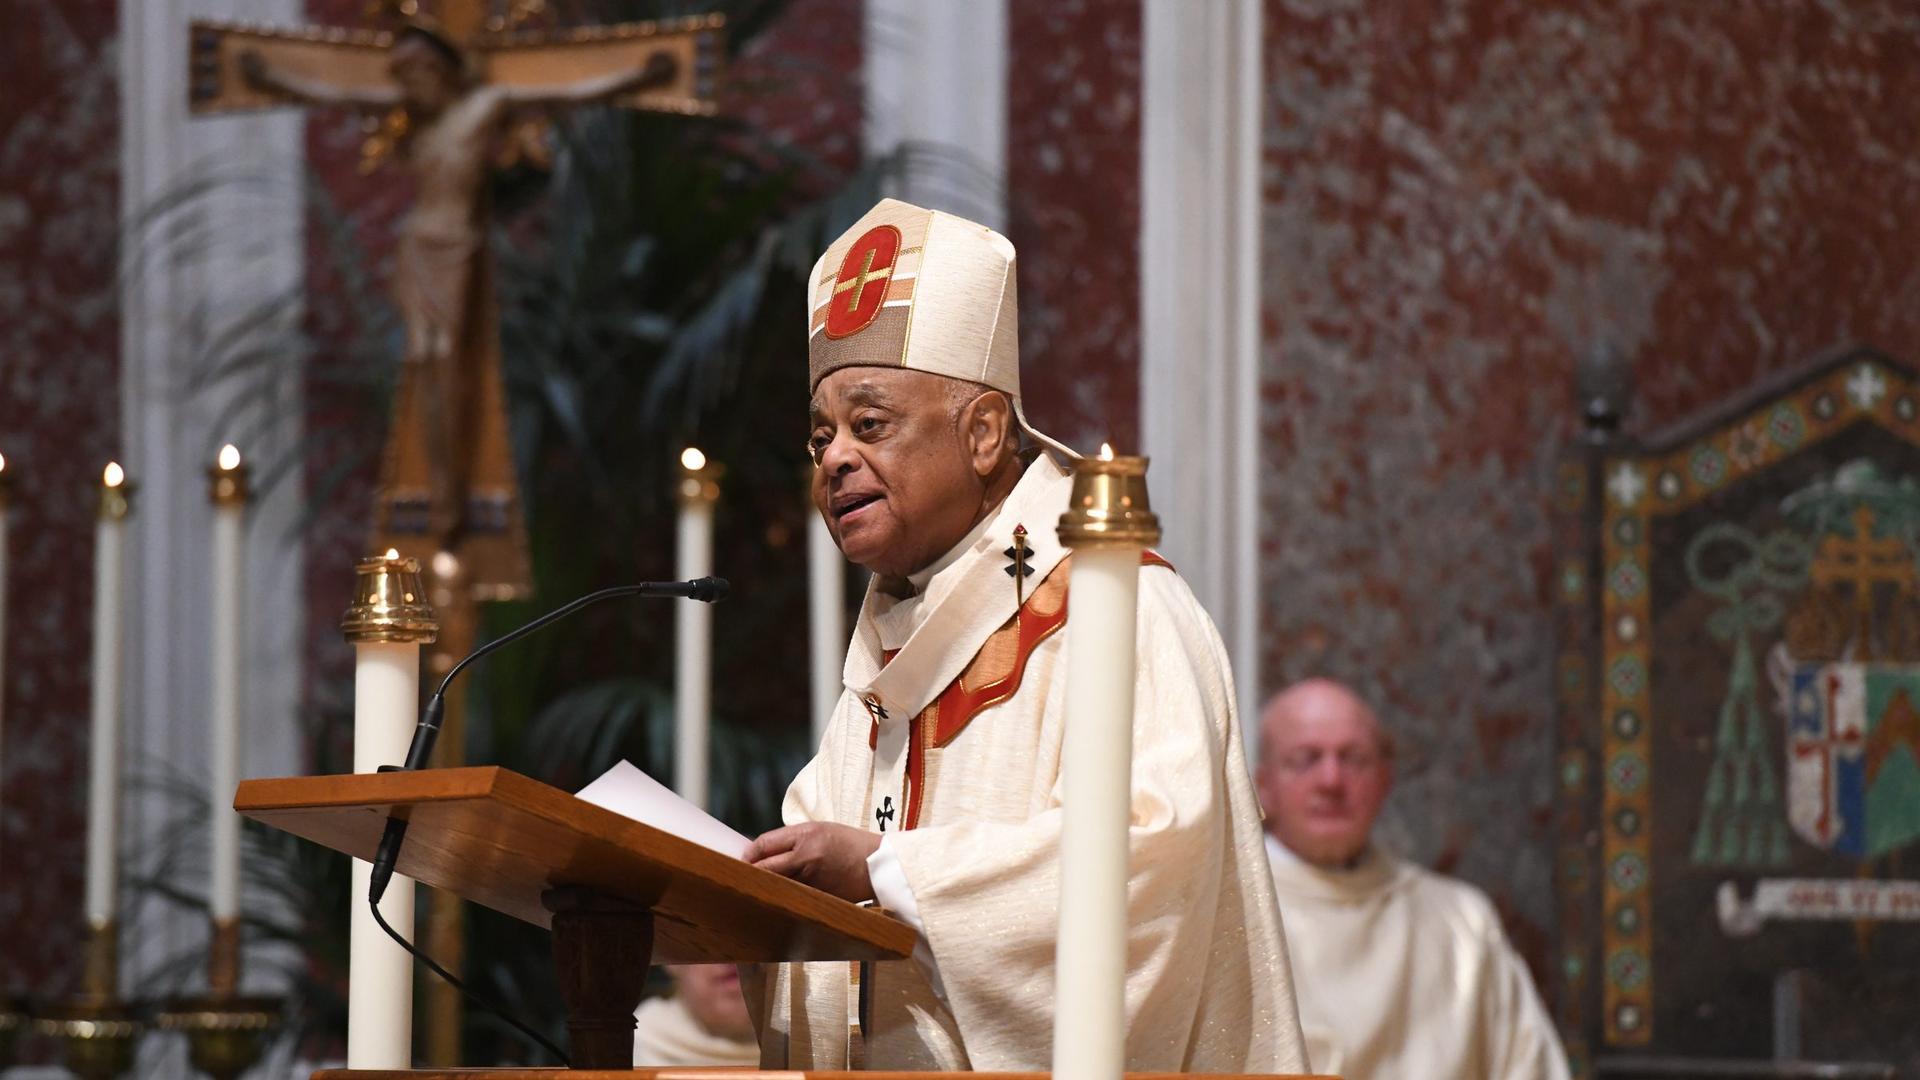 DC cardinal says LGBTQ Catholics are welcome, but Church has its rules